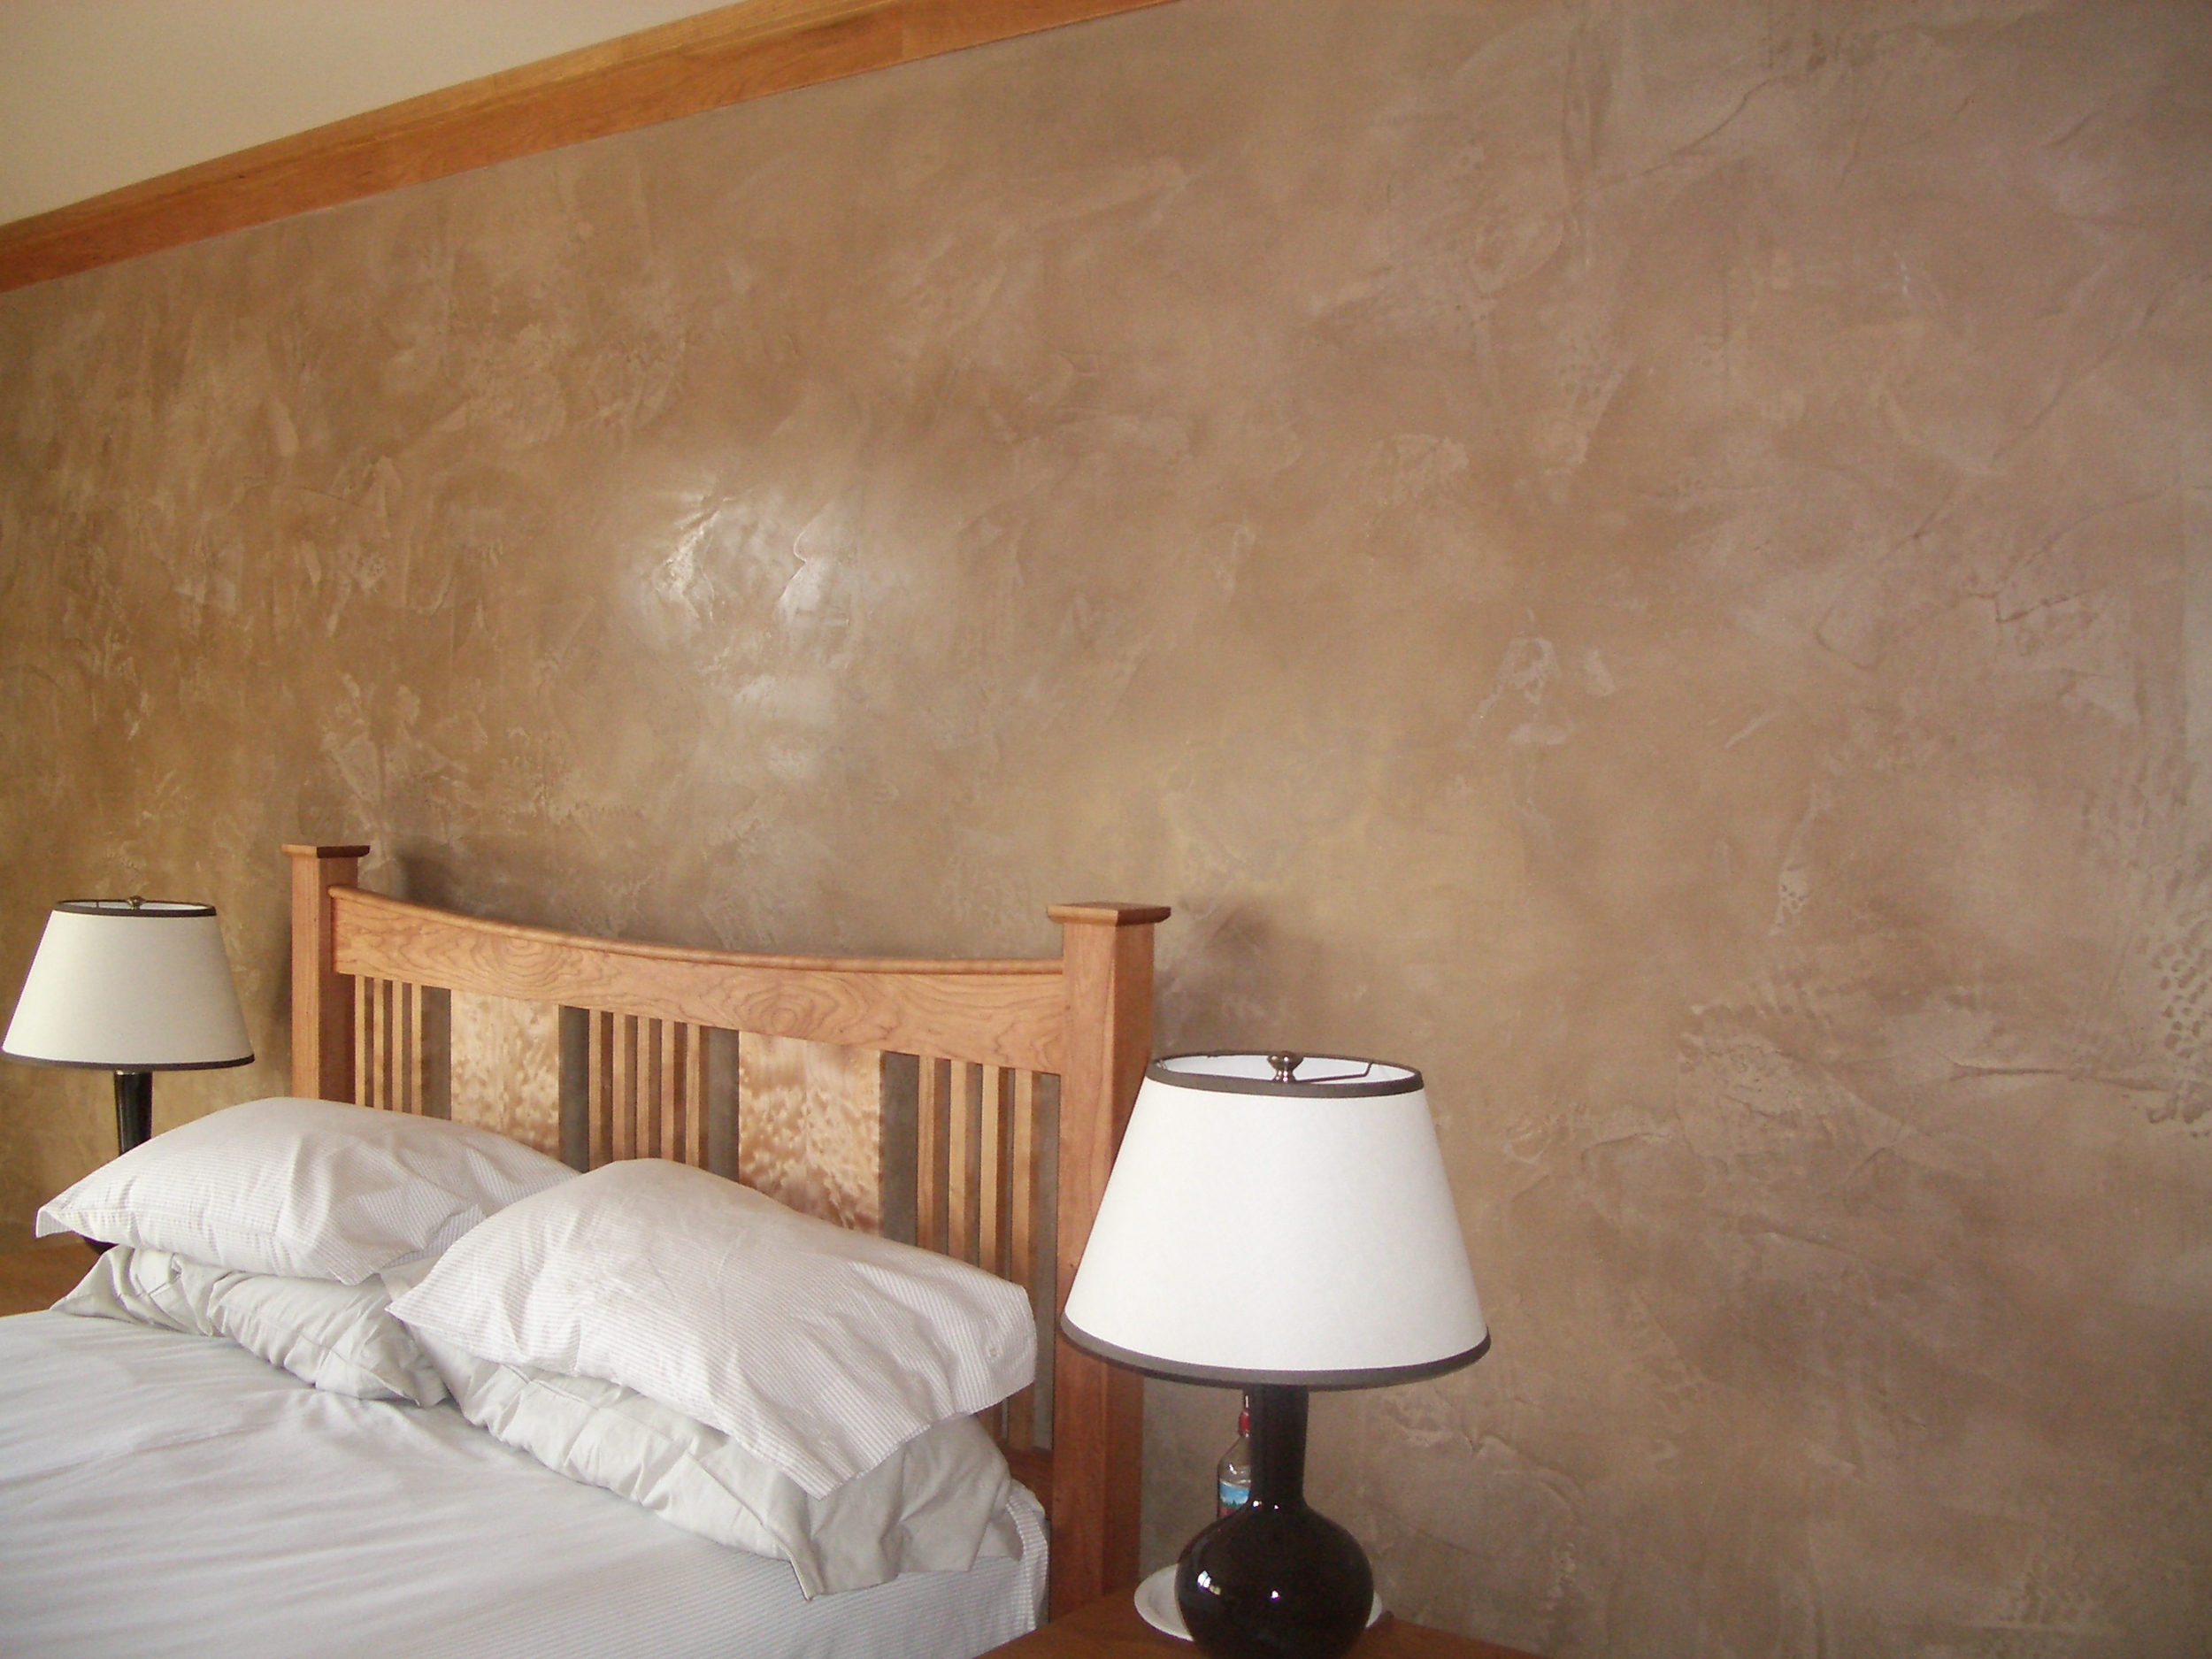    Brad Allen’s      Venetian Plaster Plus    Specializing in creative  Venetian Plaster  finishes for any décor,   PLUS  a wide variety of inspiring custom decorative and faux finishes. 